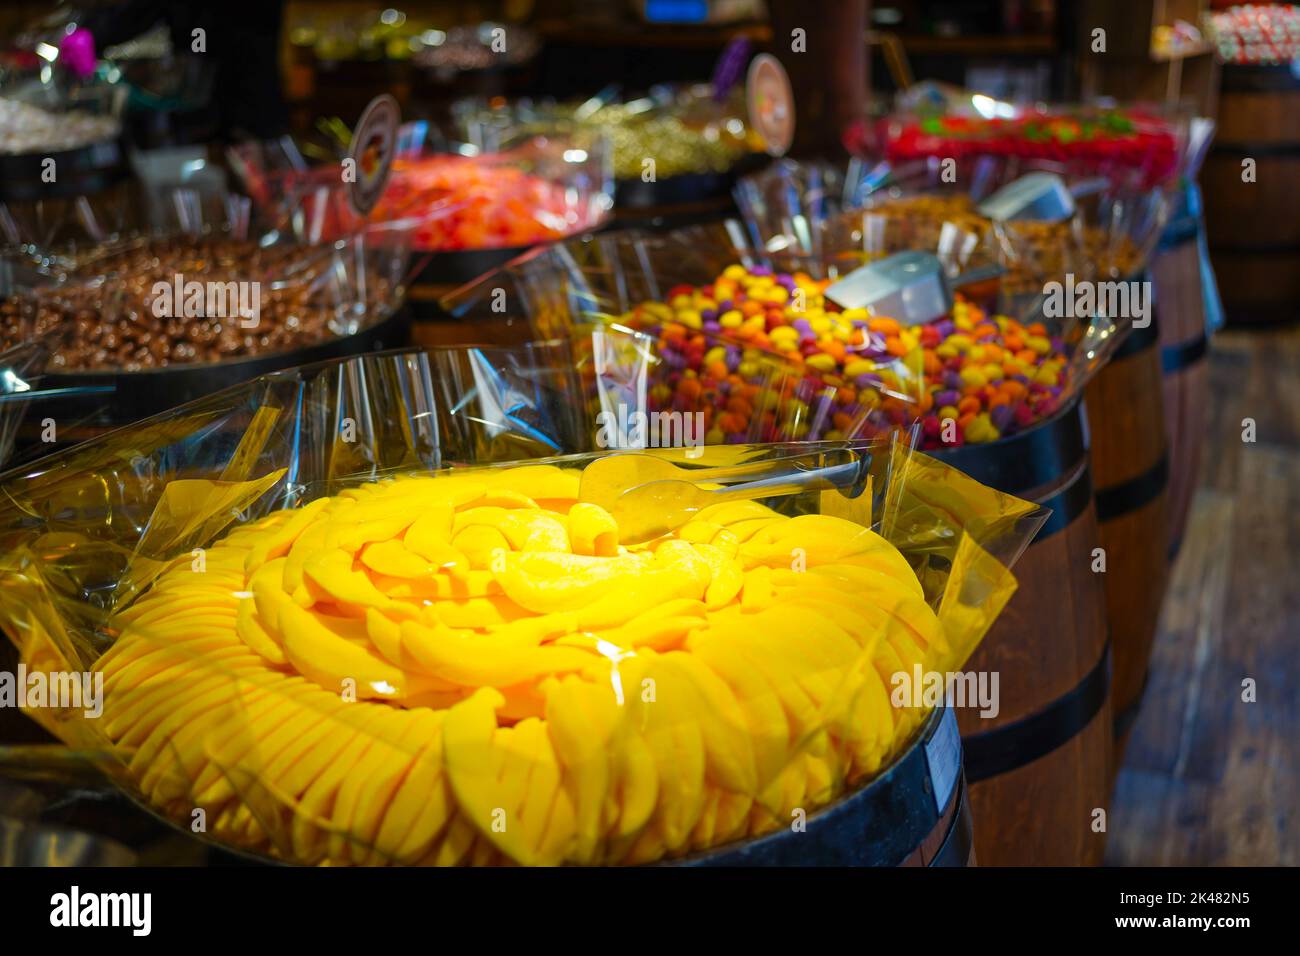 Colorful sweets in wooden barrels in a sweet shop Stock Photo